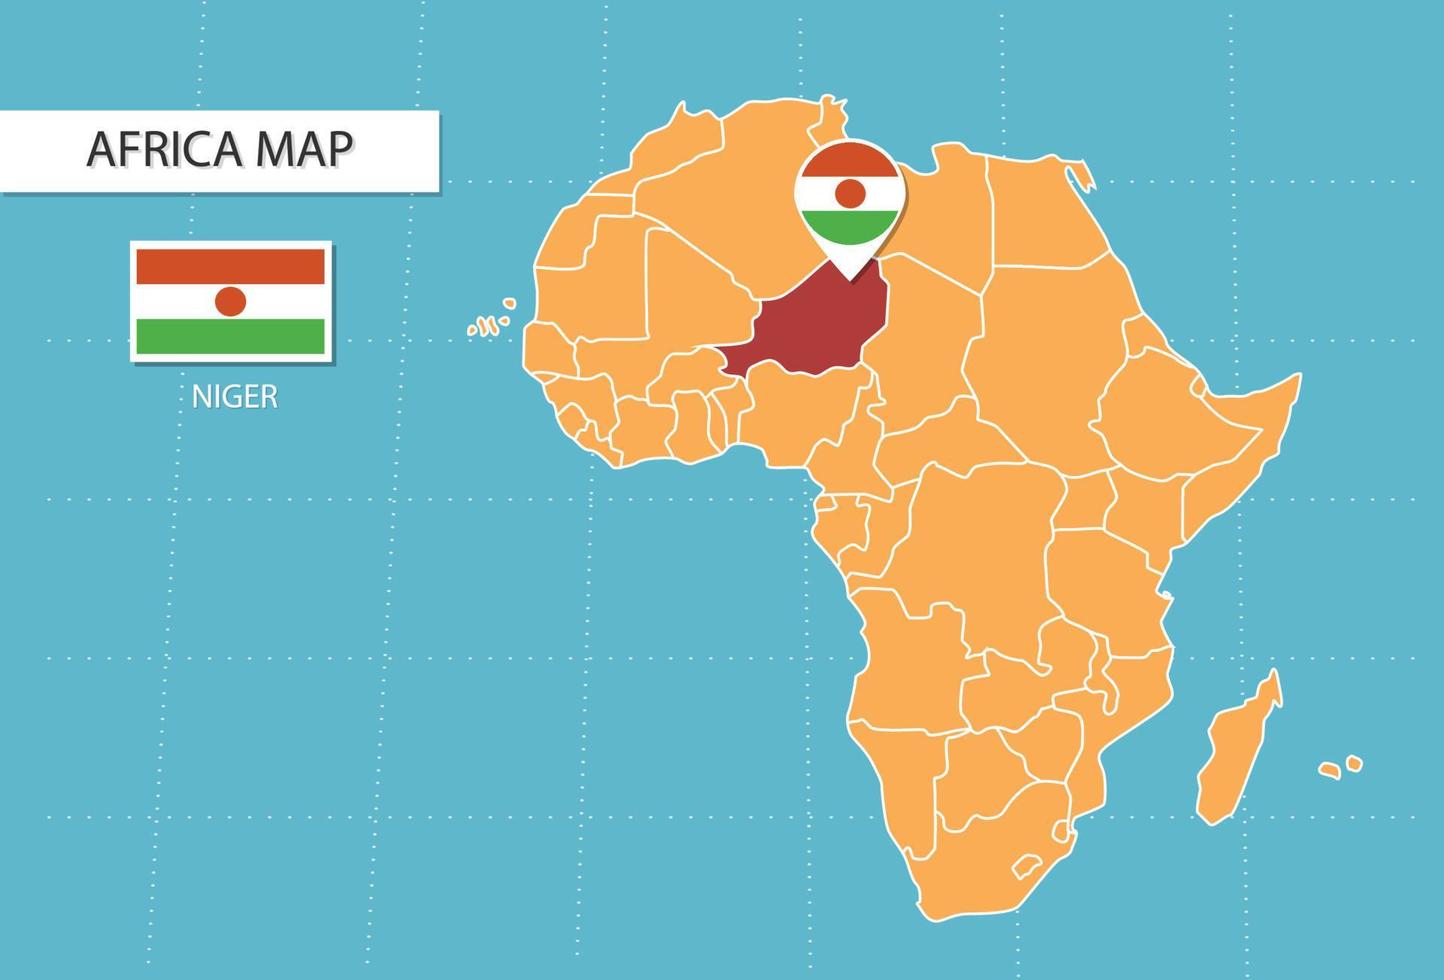 Niger map in Africa, icons showing Niger location and flags. vector